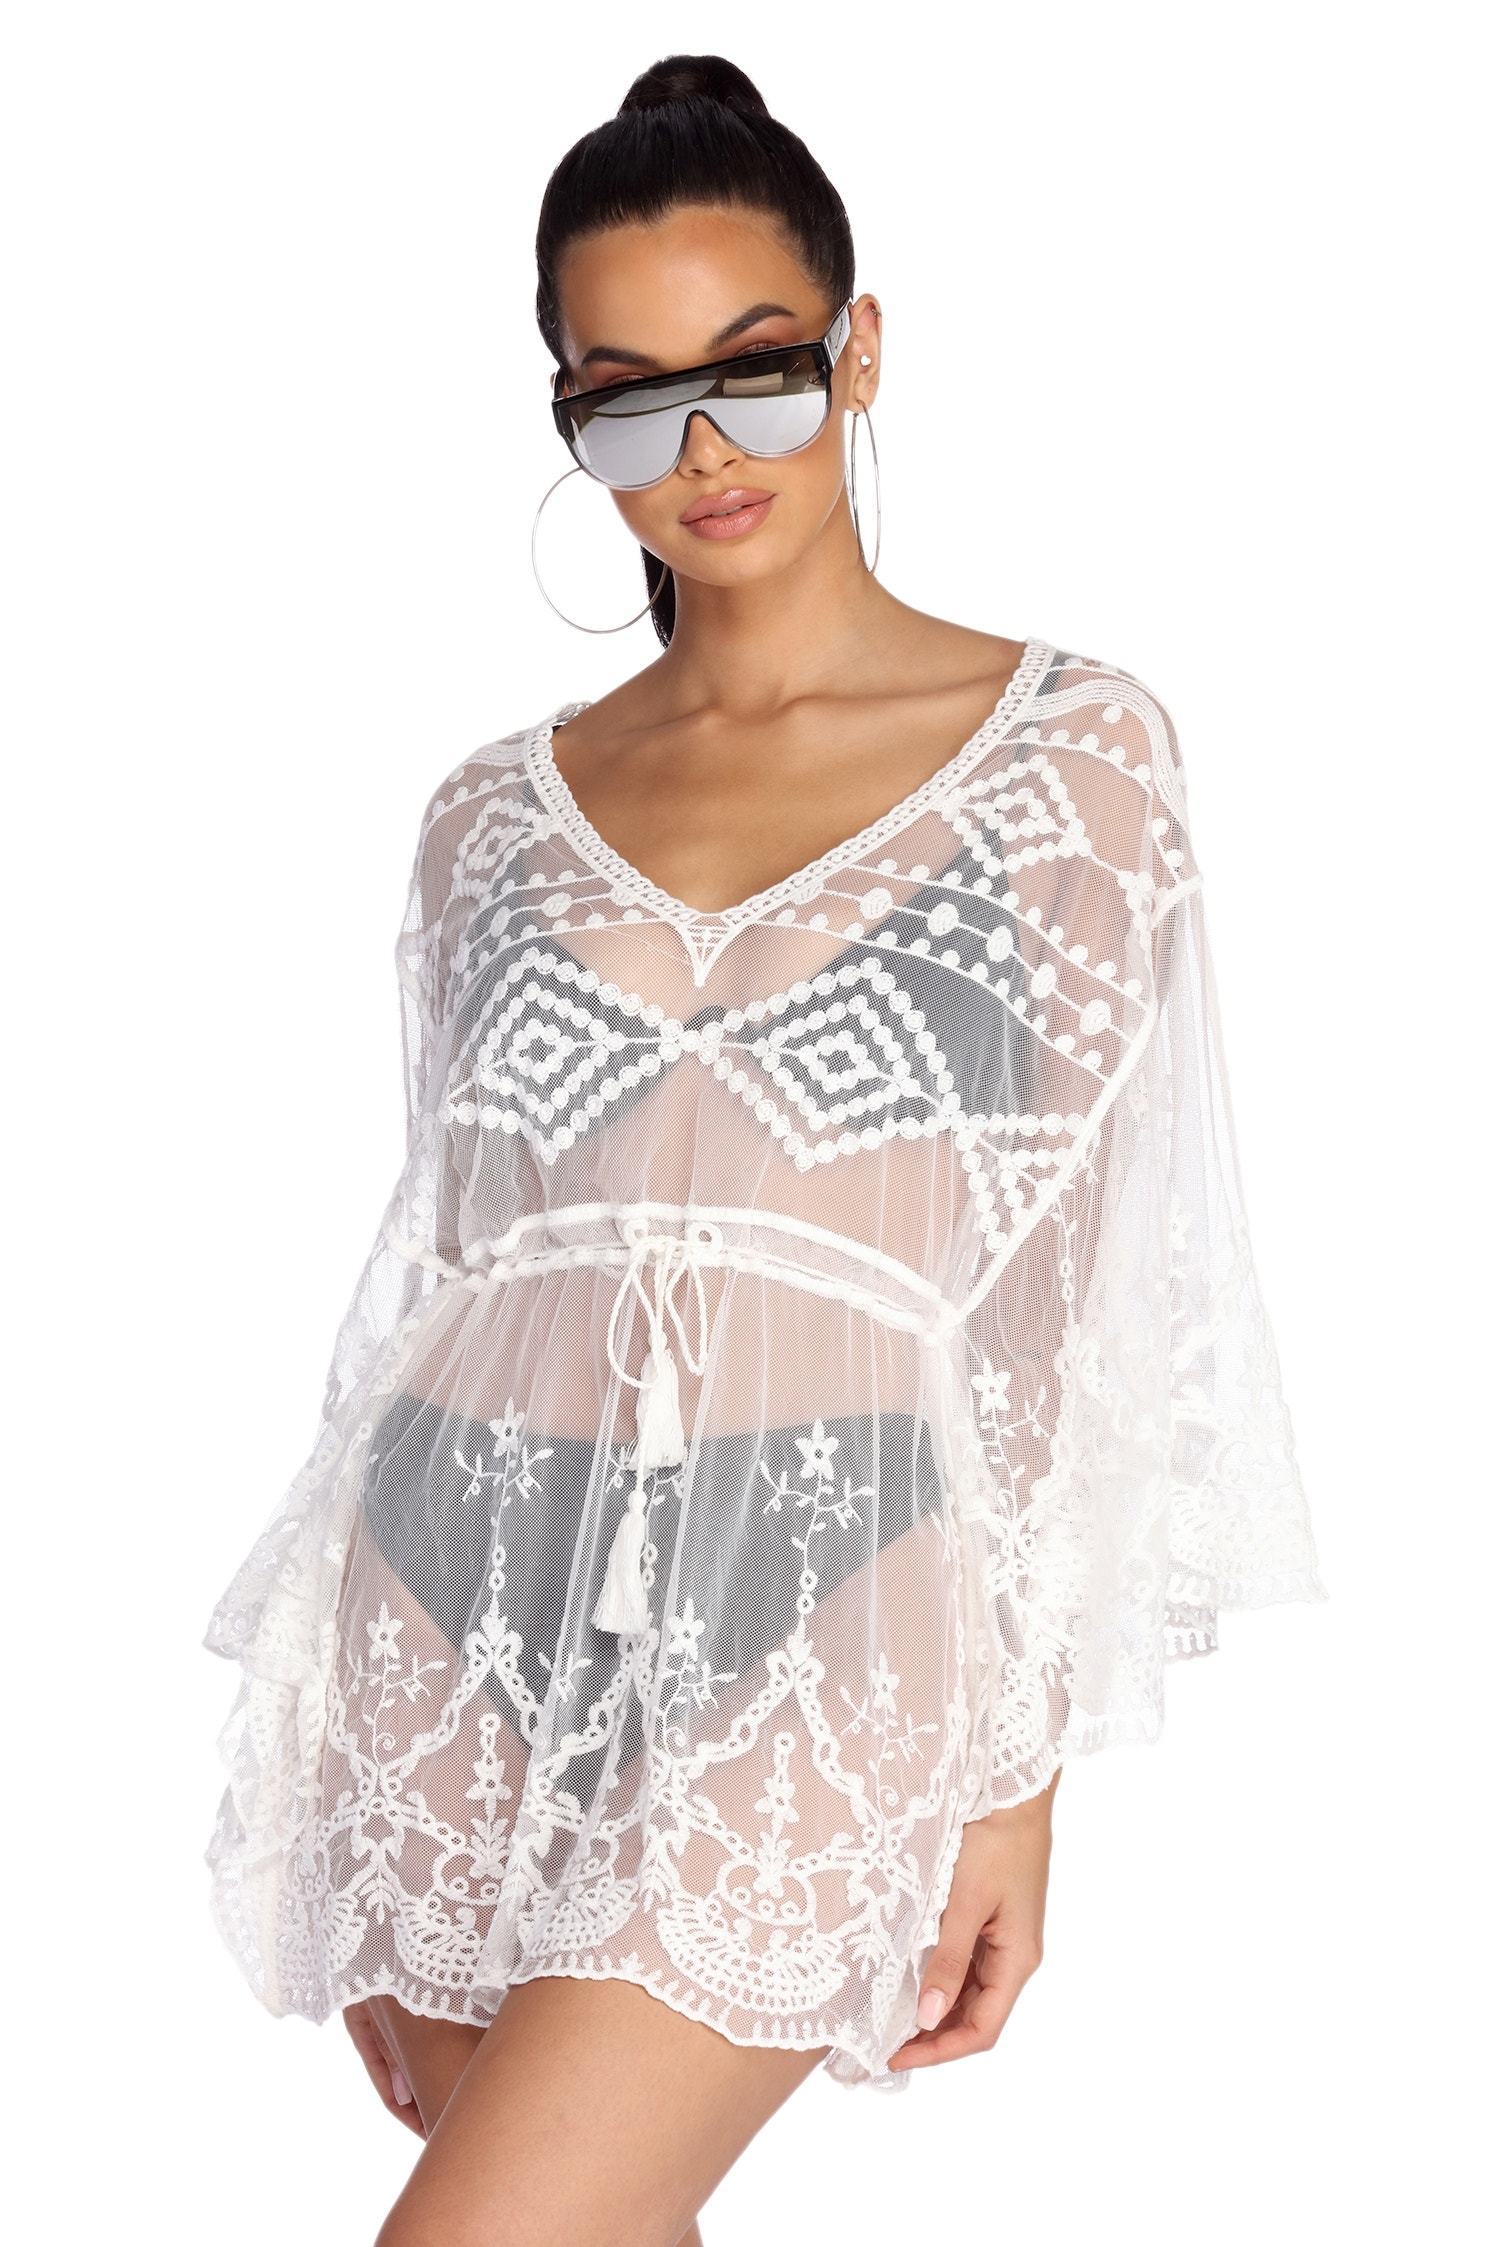 Beach Ready Embroidered Mesh Cover Up - Lady Occasions